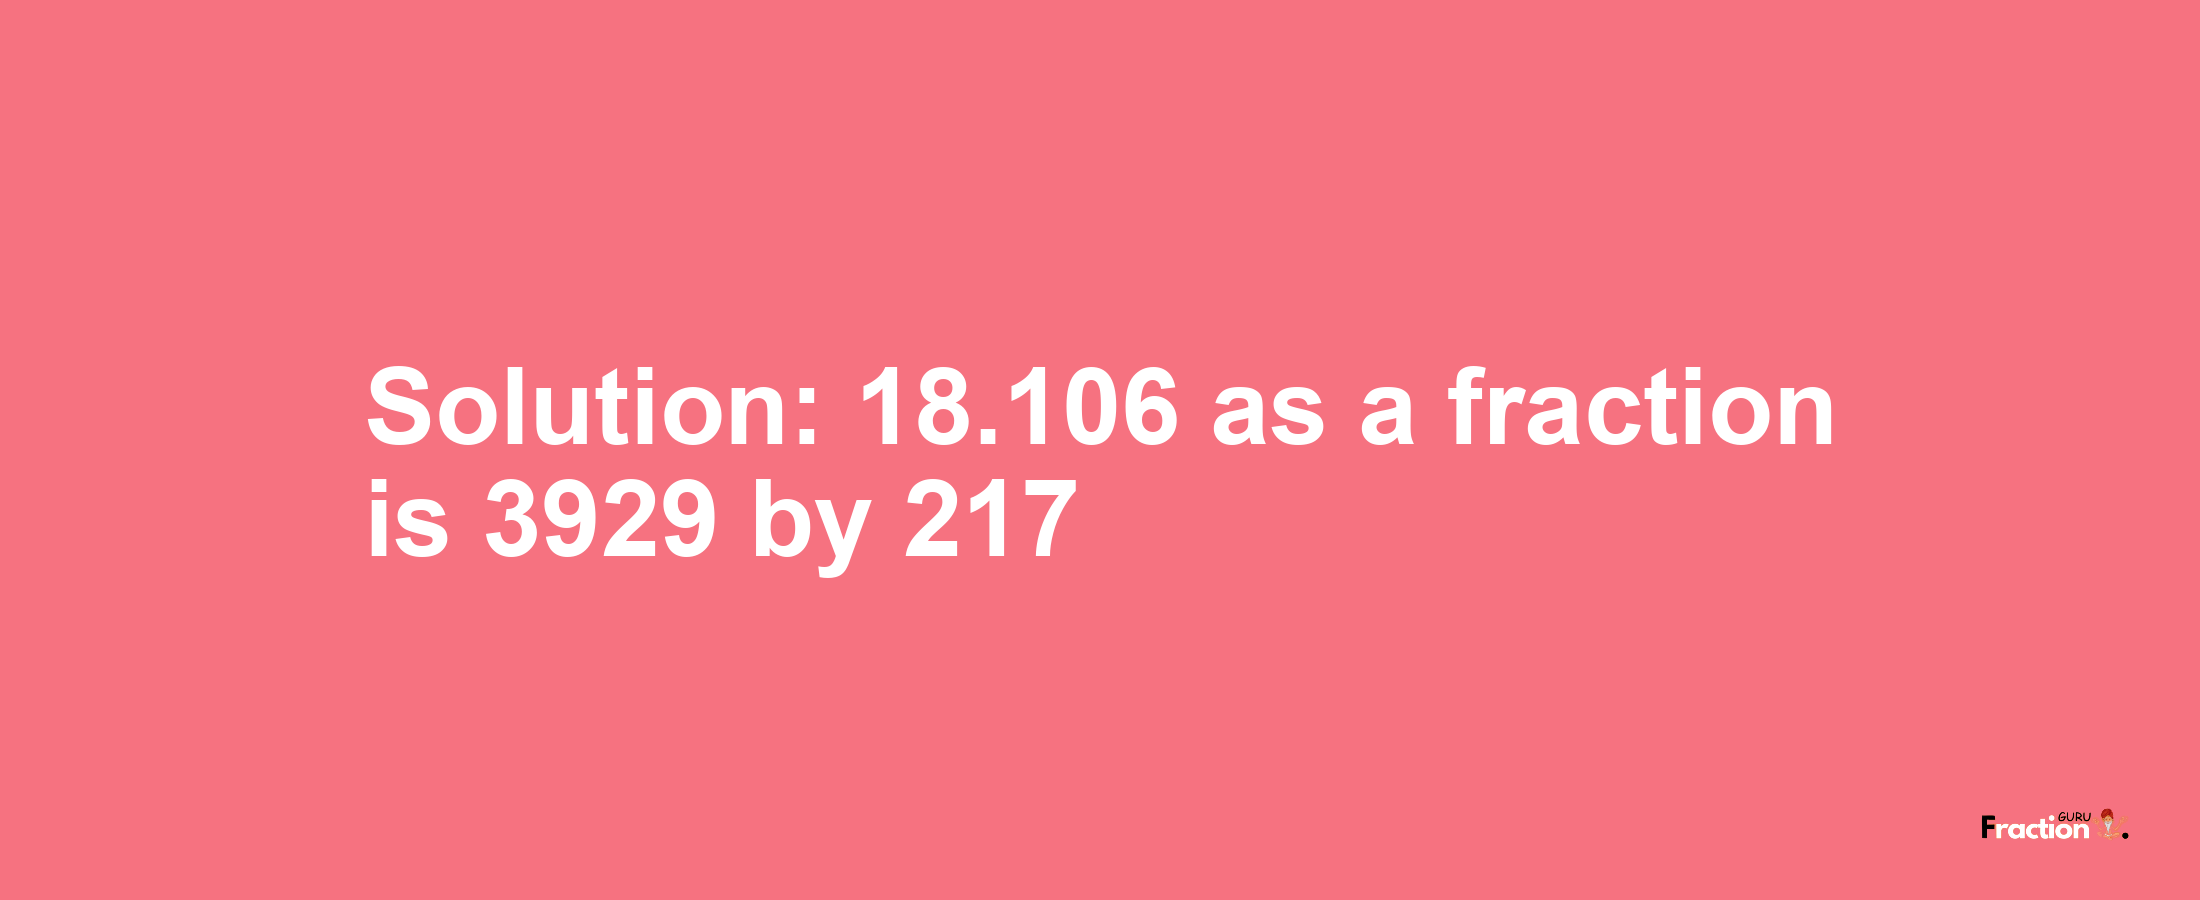 Solution:18.106 as a fraction is 3929/217